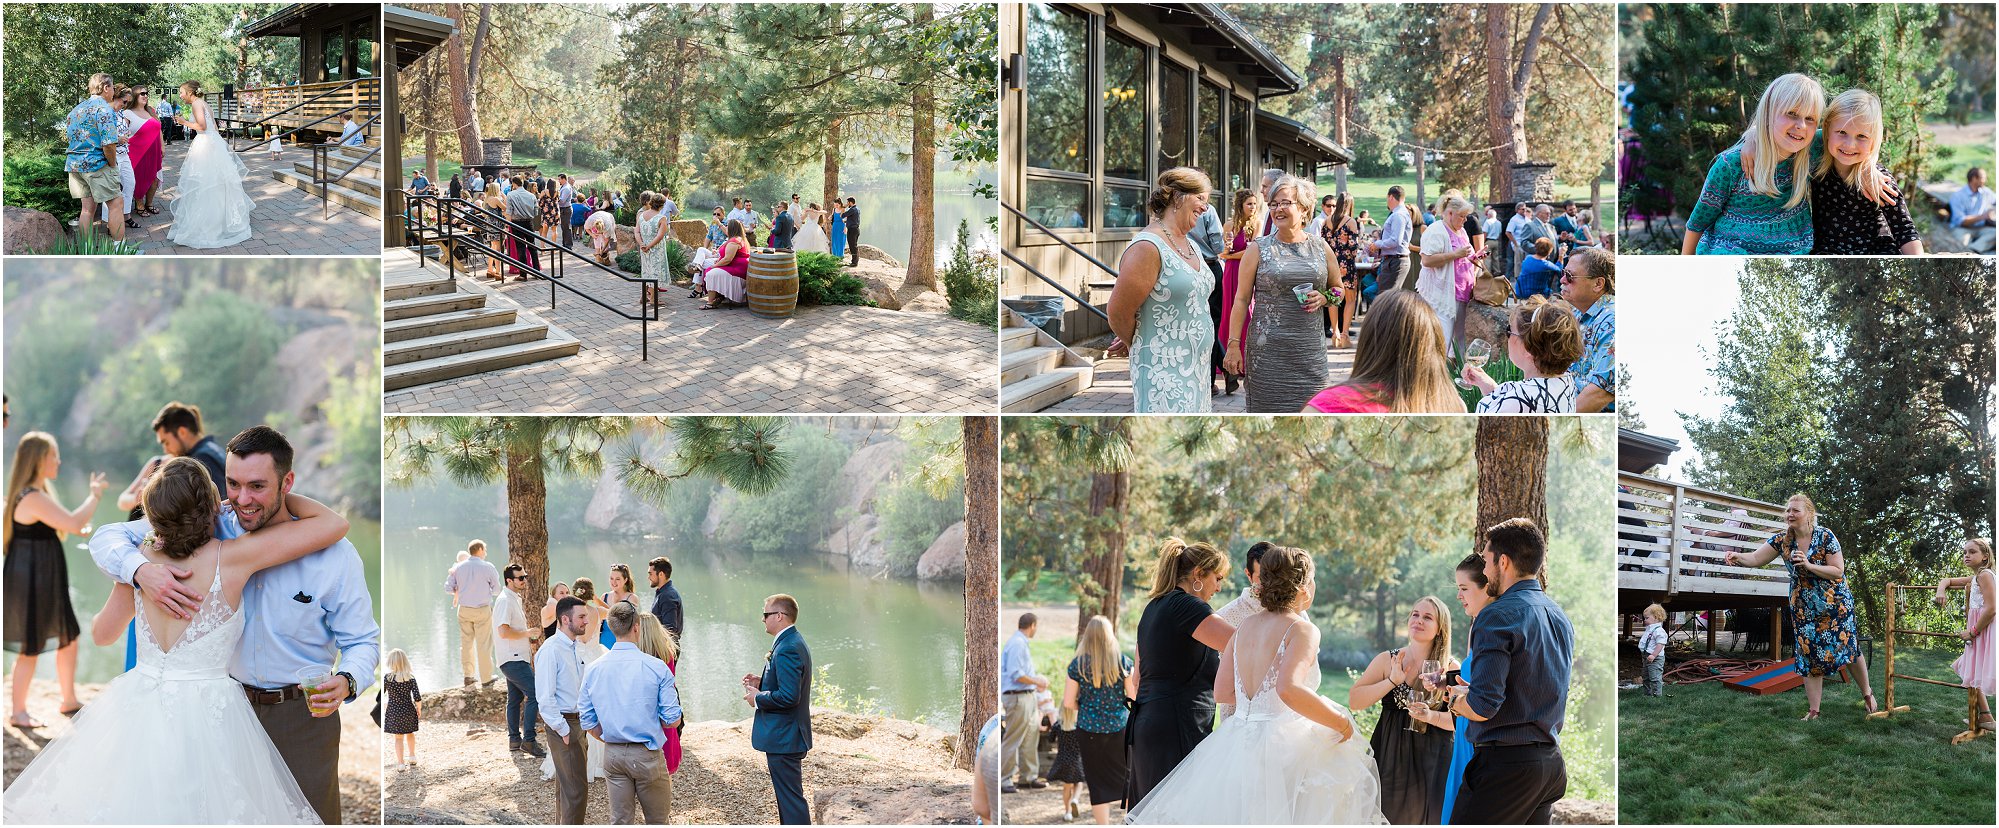 Guests mingle outdoors in the gorgeous summer weather at the Rock Springs Ranch wedding venue in Bend, OR. | Erica Swantek Photography